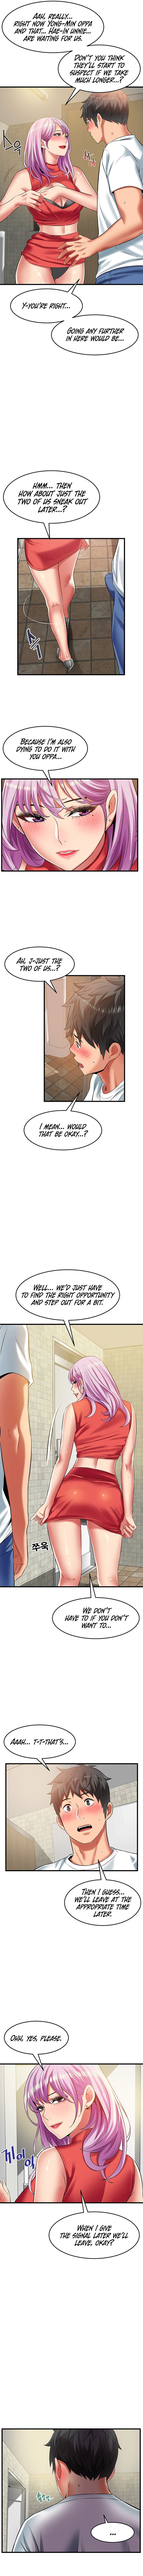 an-alley-story-chap-39-3